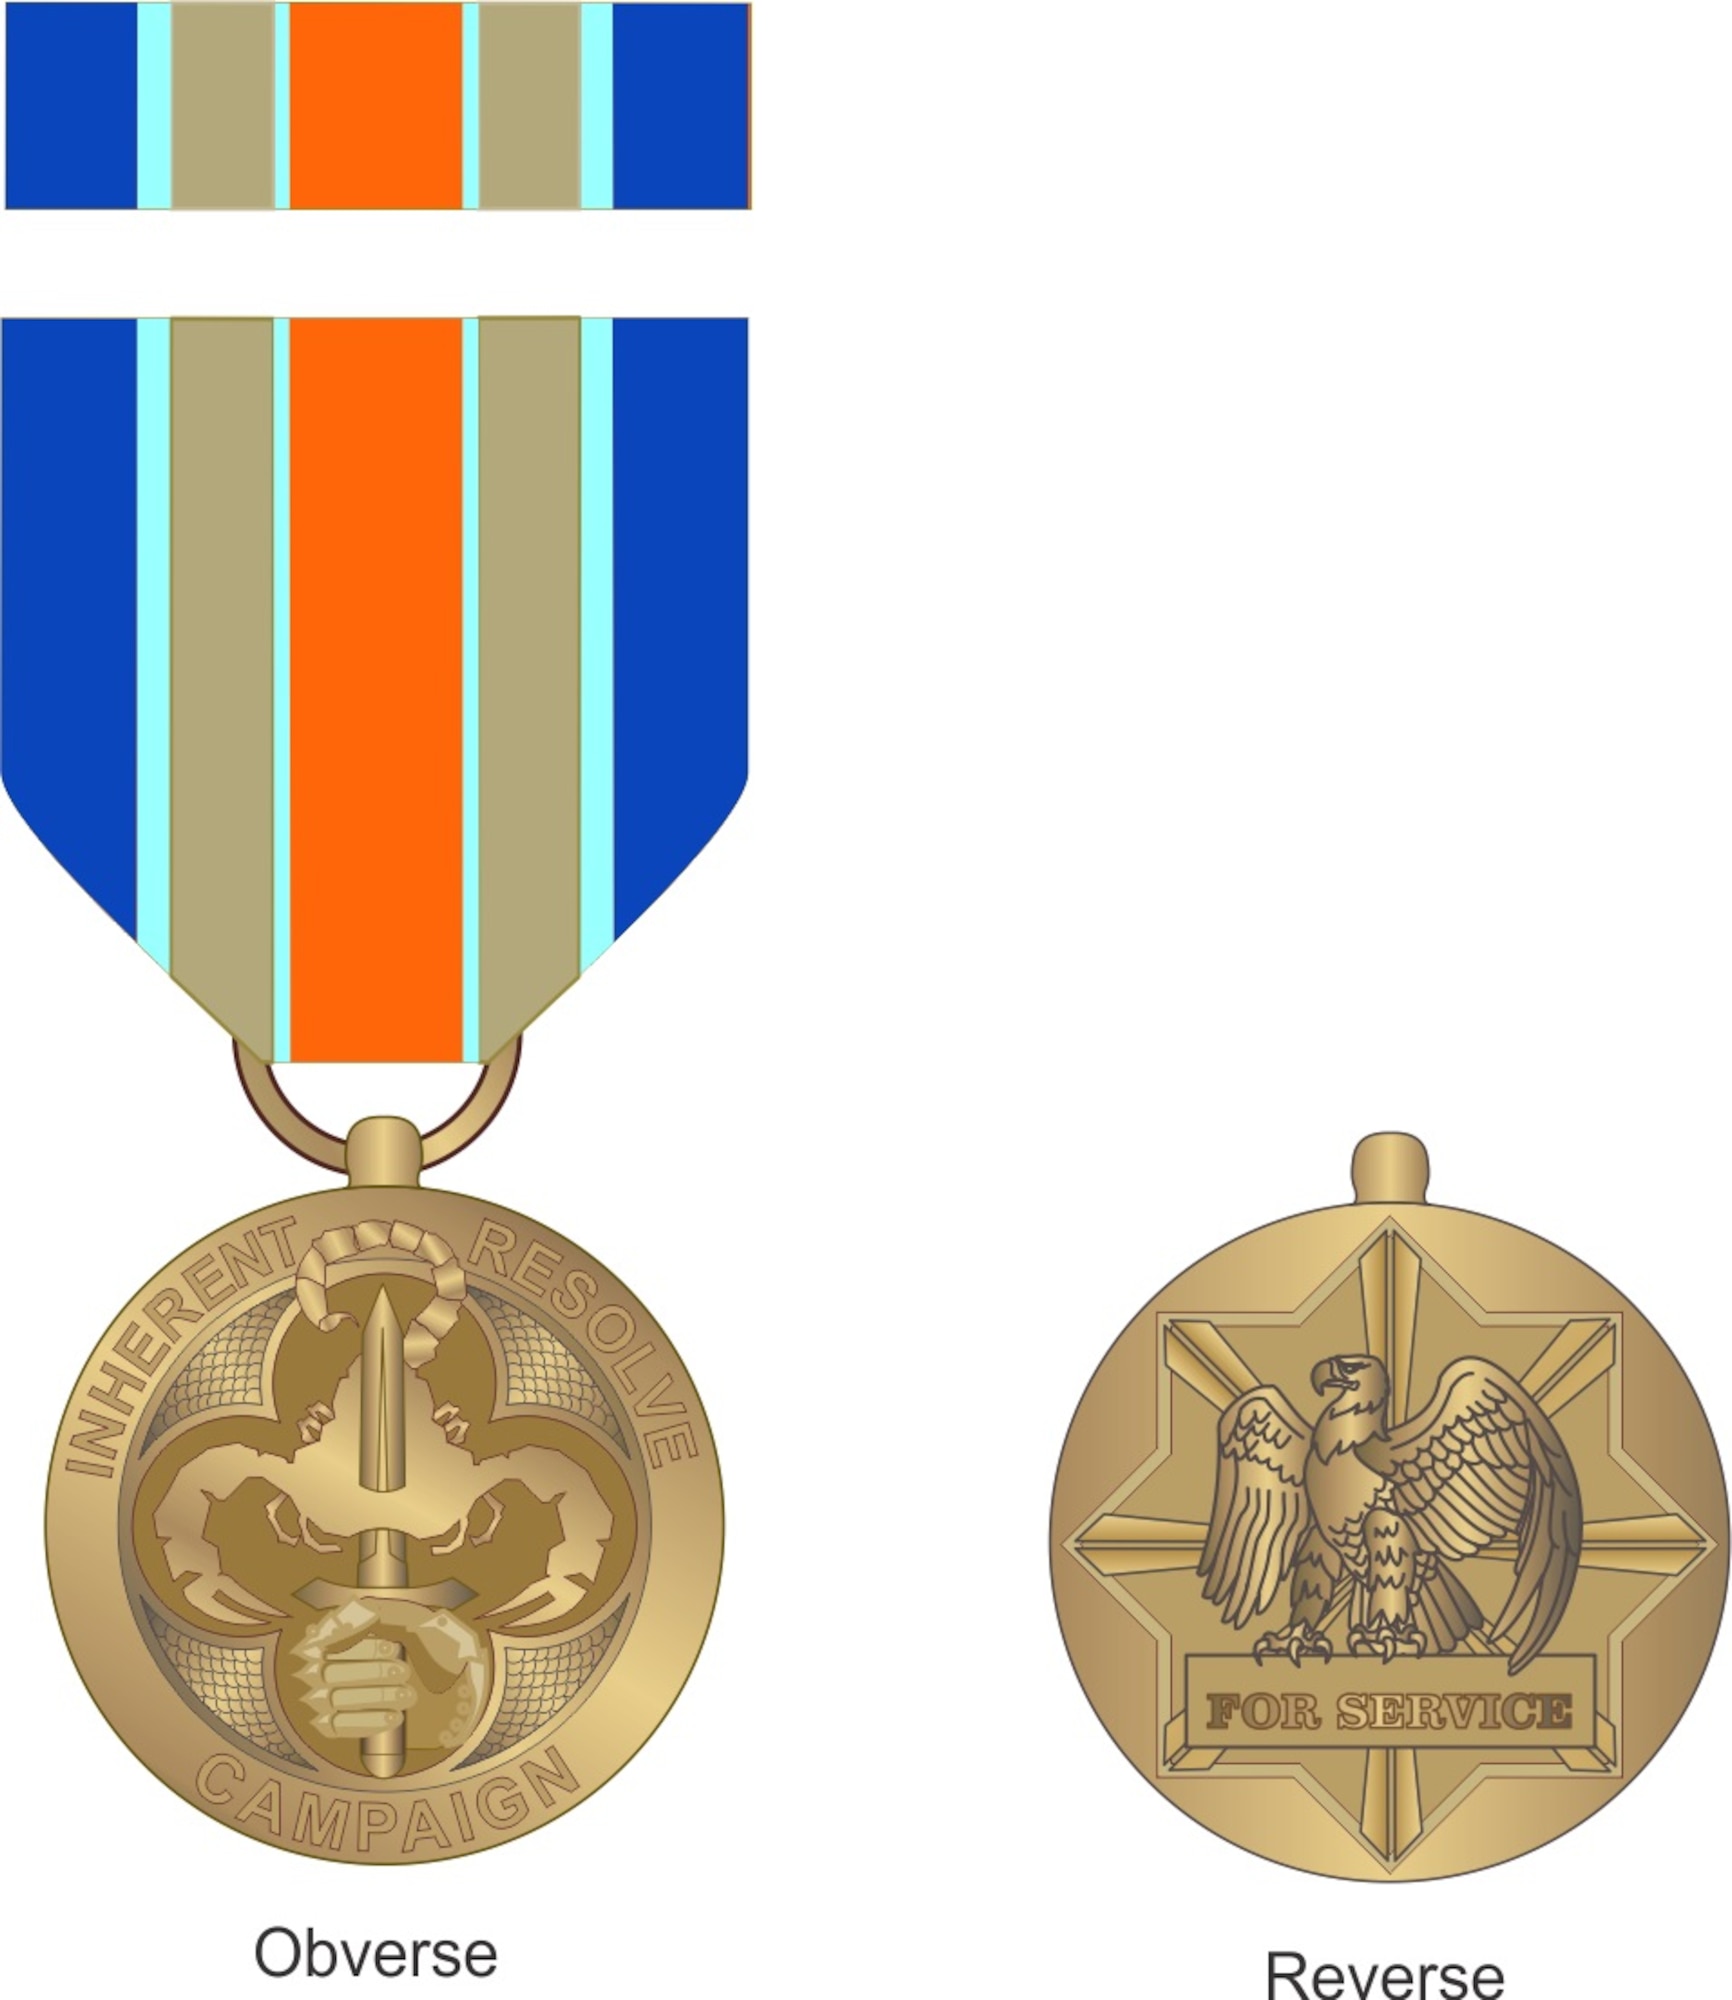 On March 30, 2016, the President signed an Executive Order titled, “Establishing the Inherent Resolve Campaign Medal” based on the recommendations of Secretary of Defense and Chairman of the Joint Chiefs of Staff.  Today, the Secretary of Defense officially announced the Inherent Resolve Campaign Medal (IRCM), which distinctly recognizes our Service members battling terrorist groups in Iraq and Syria.   Approximately 11,000 service members are eligible for the new award as of March 30, 2016  (Courtesy artwork)